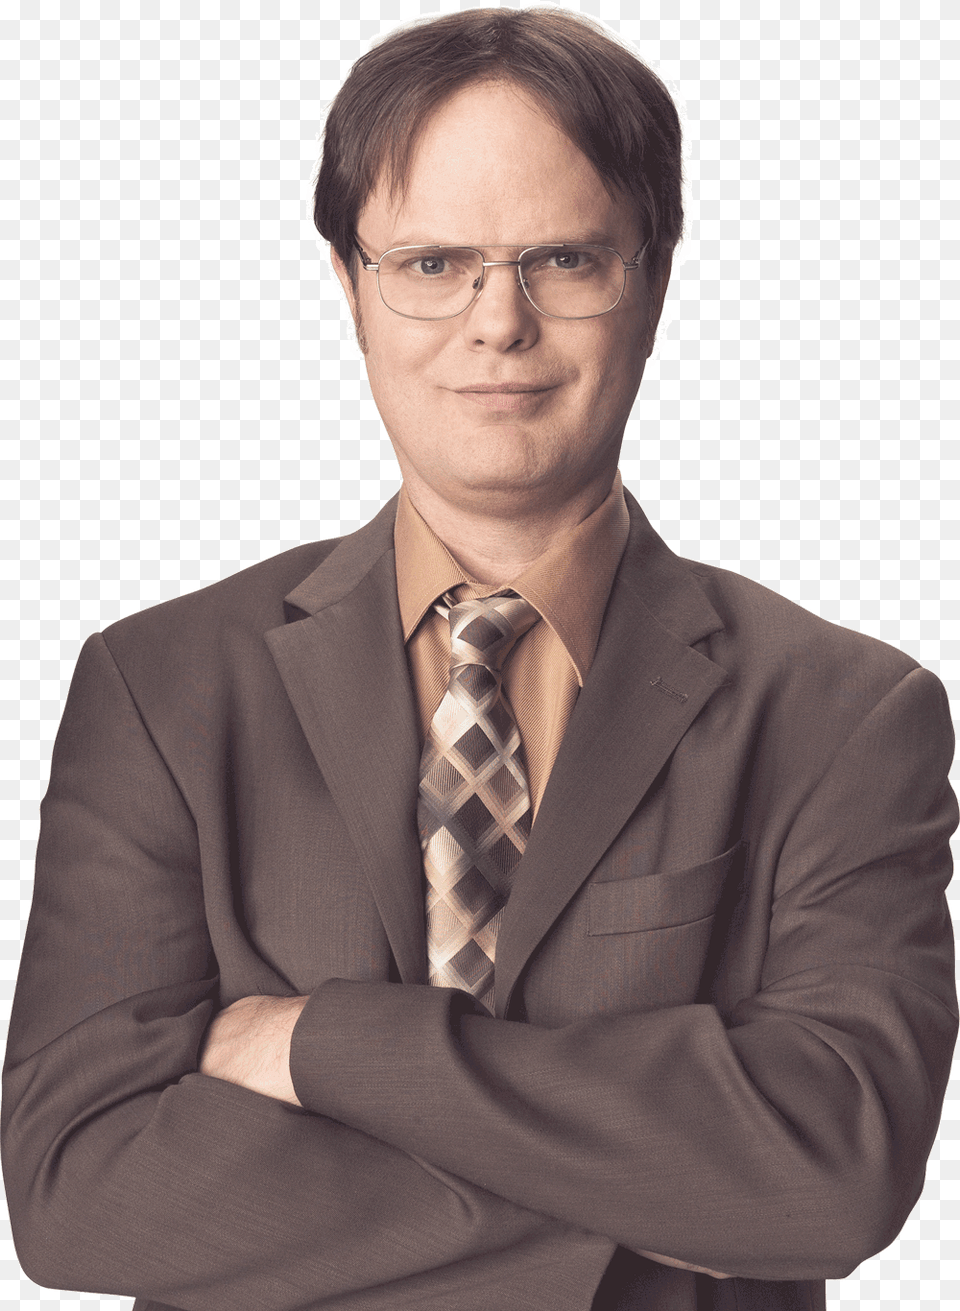 Download Clipart With Dwight Schrute, Accessories, Suit, Necktie, Jacket Free Png